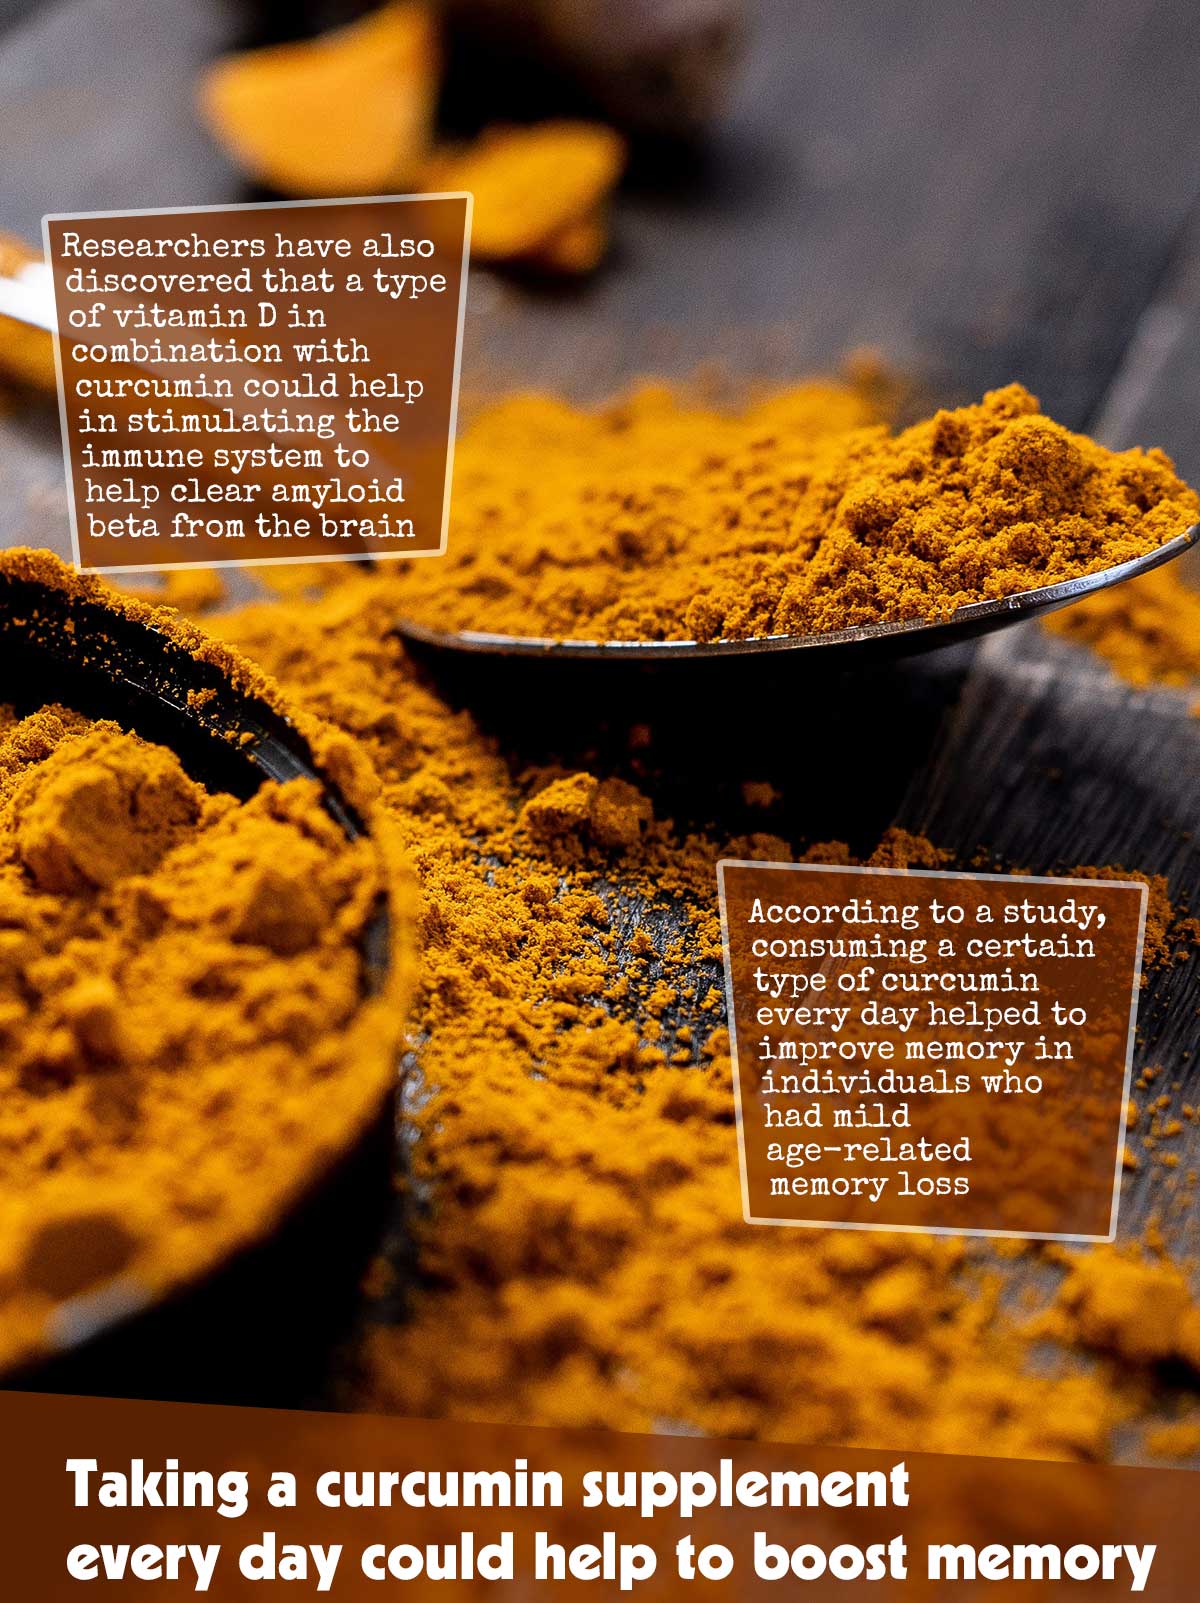 Taking a curcumin supplement every day could help improve memory